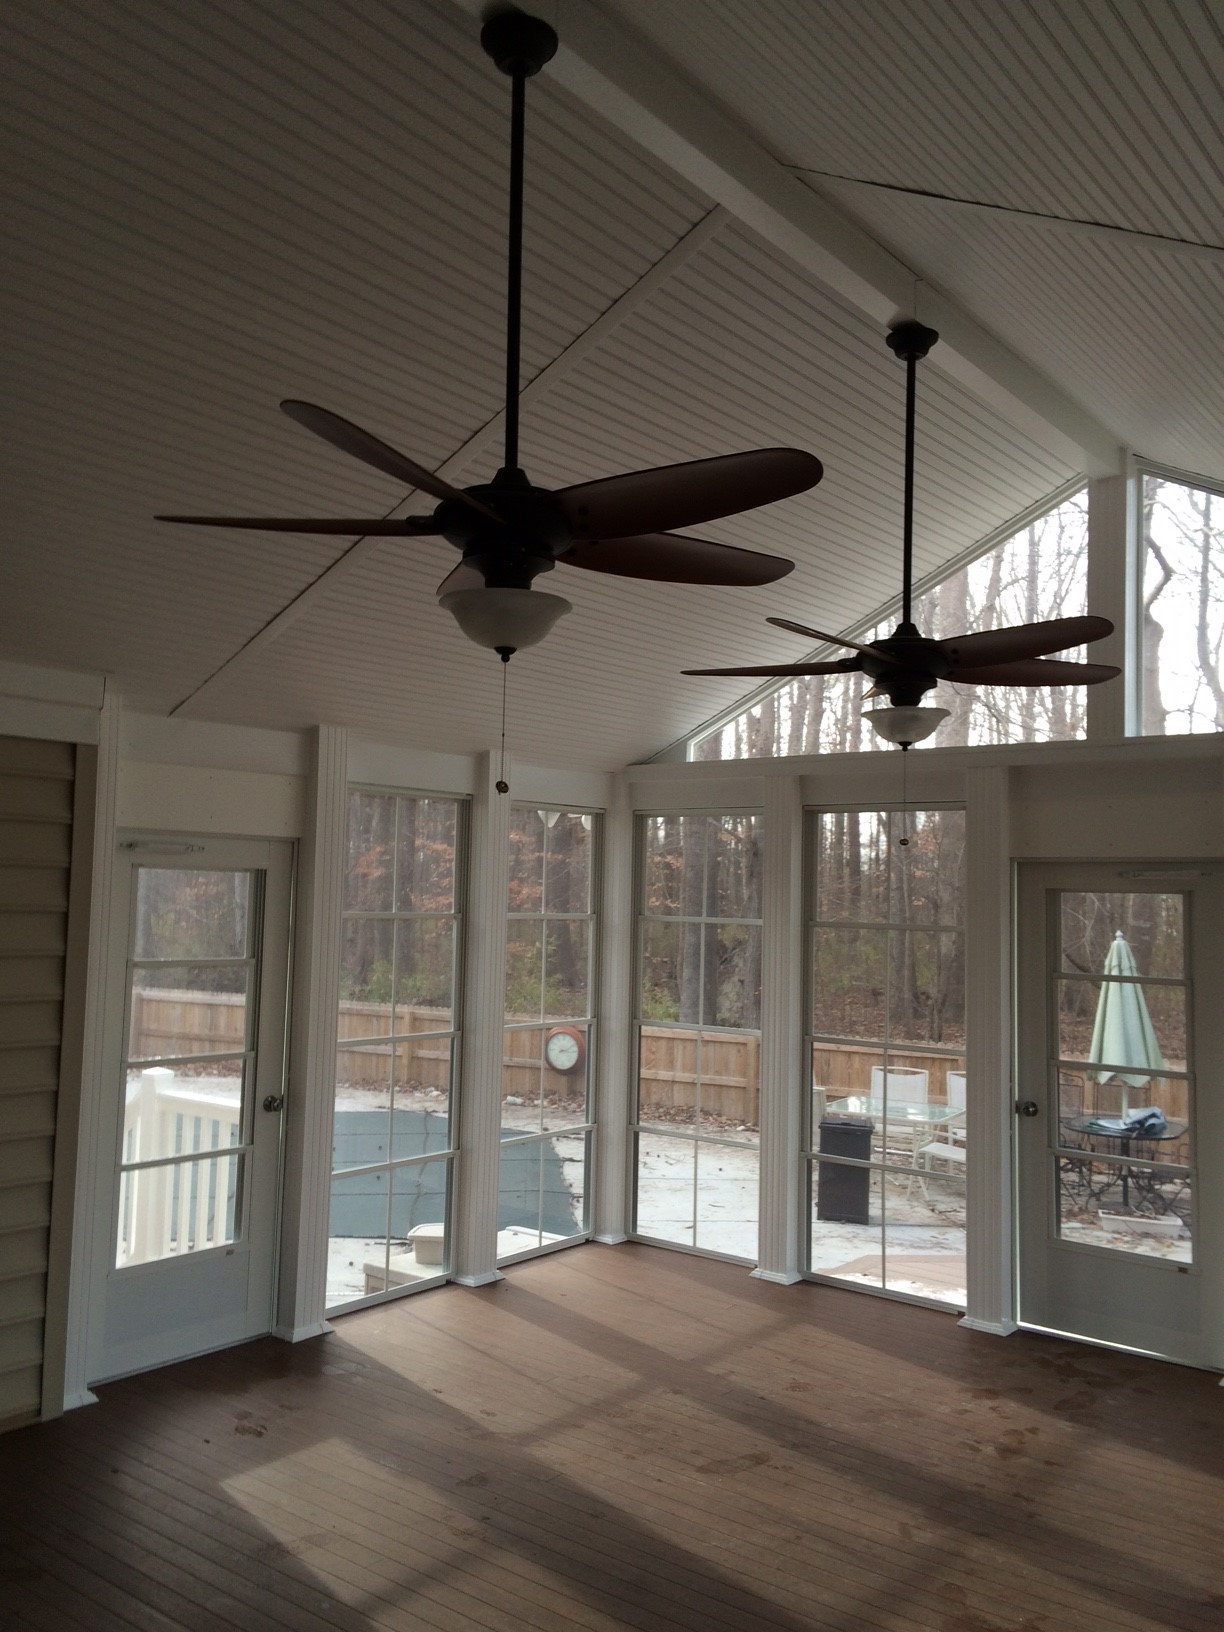 Sun room porch with ceiling fans